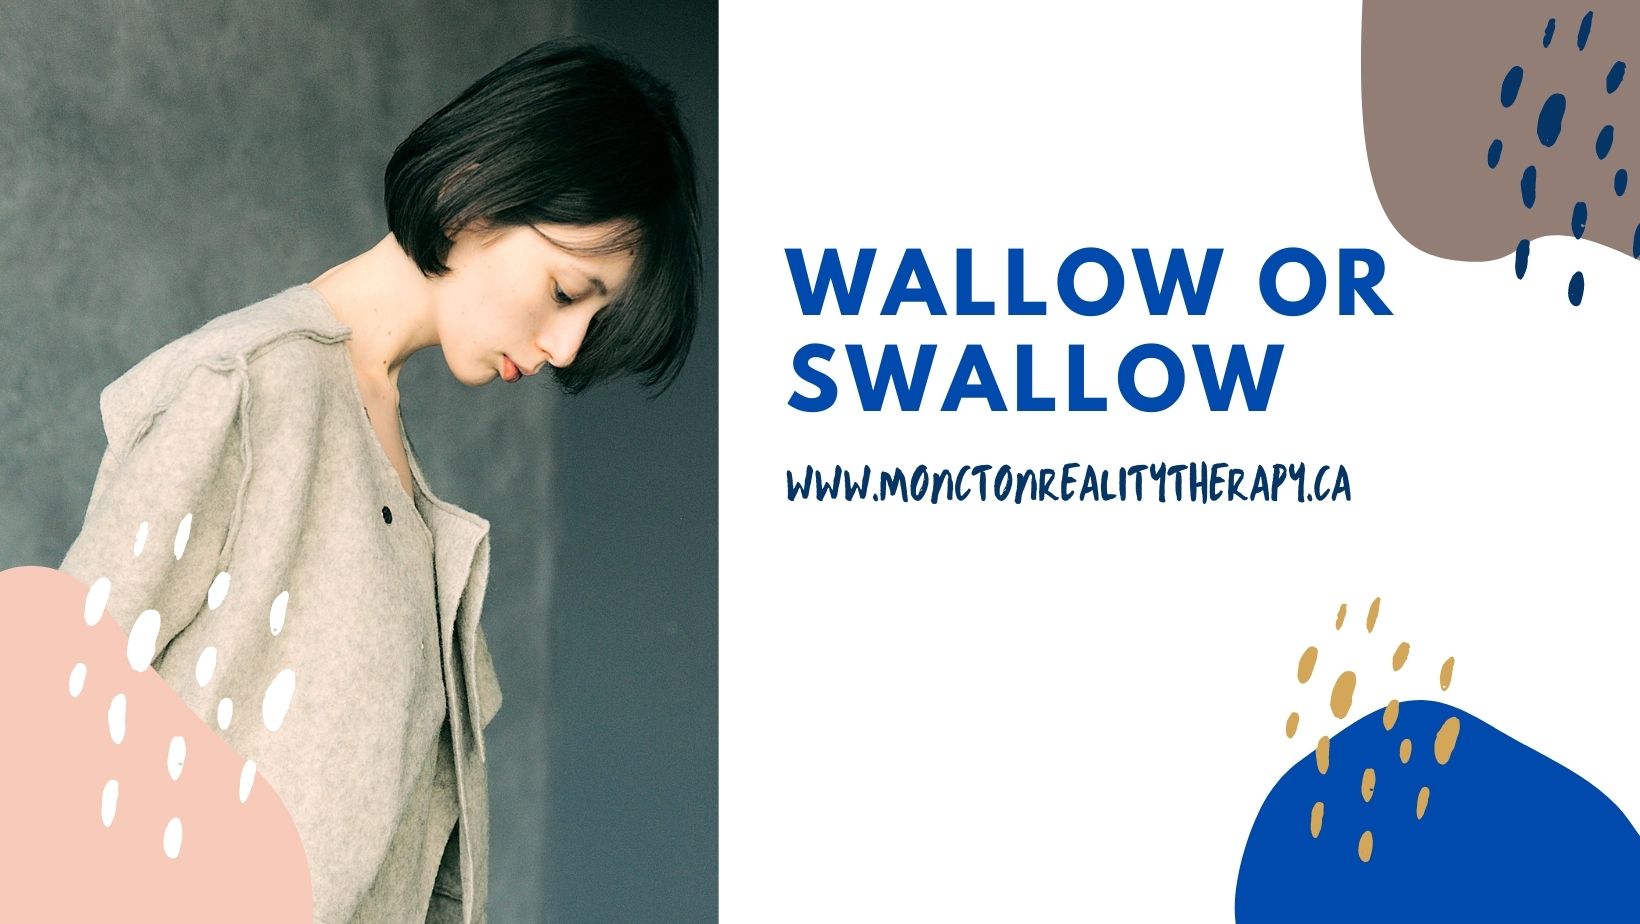 Wallow or swallow